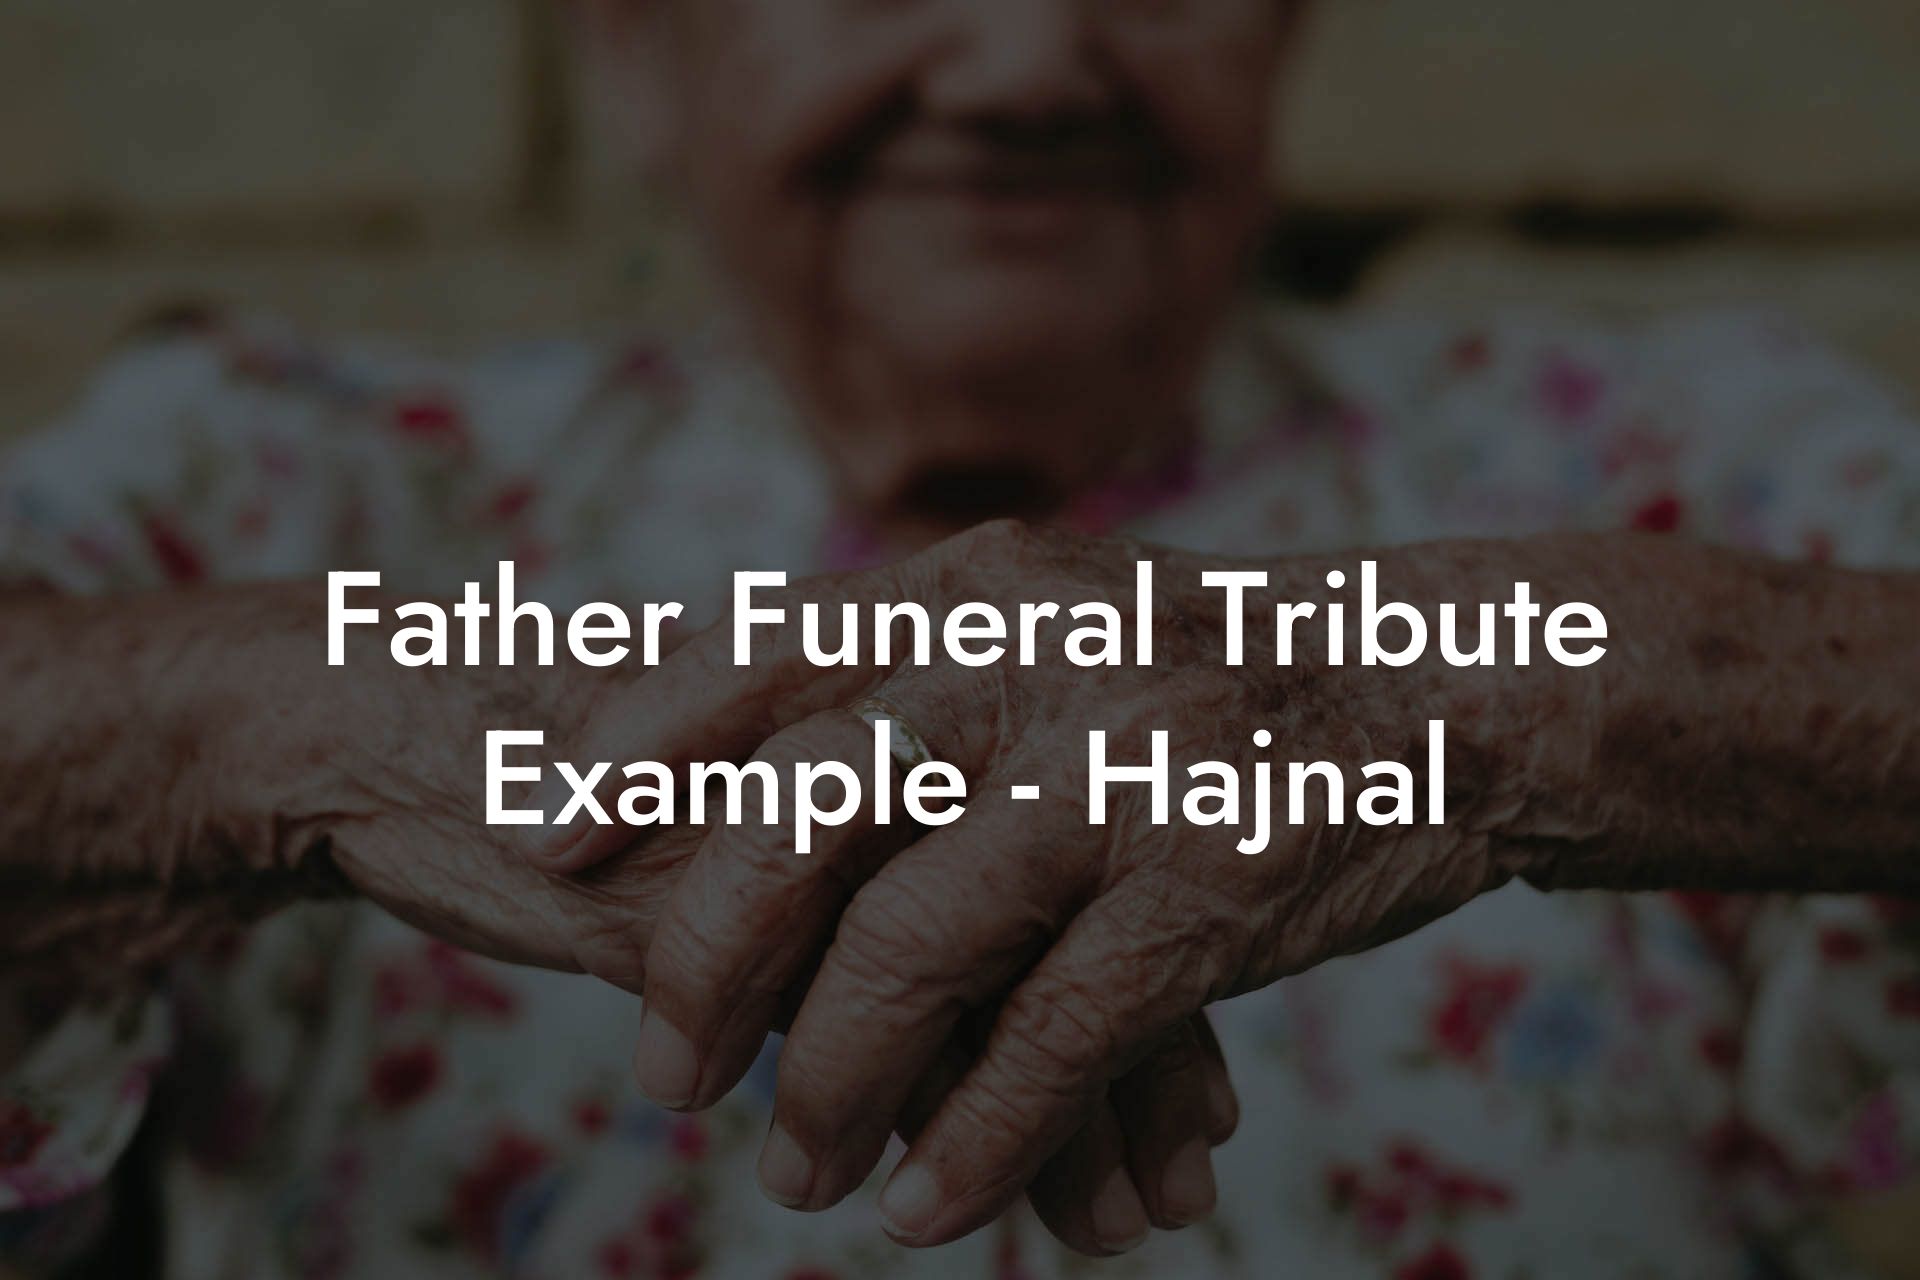 Father Funeral Tribute Example - Hajnal